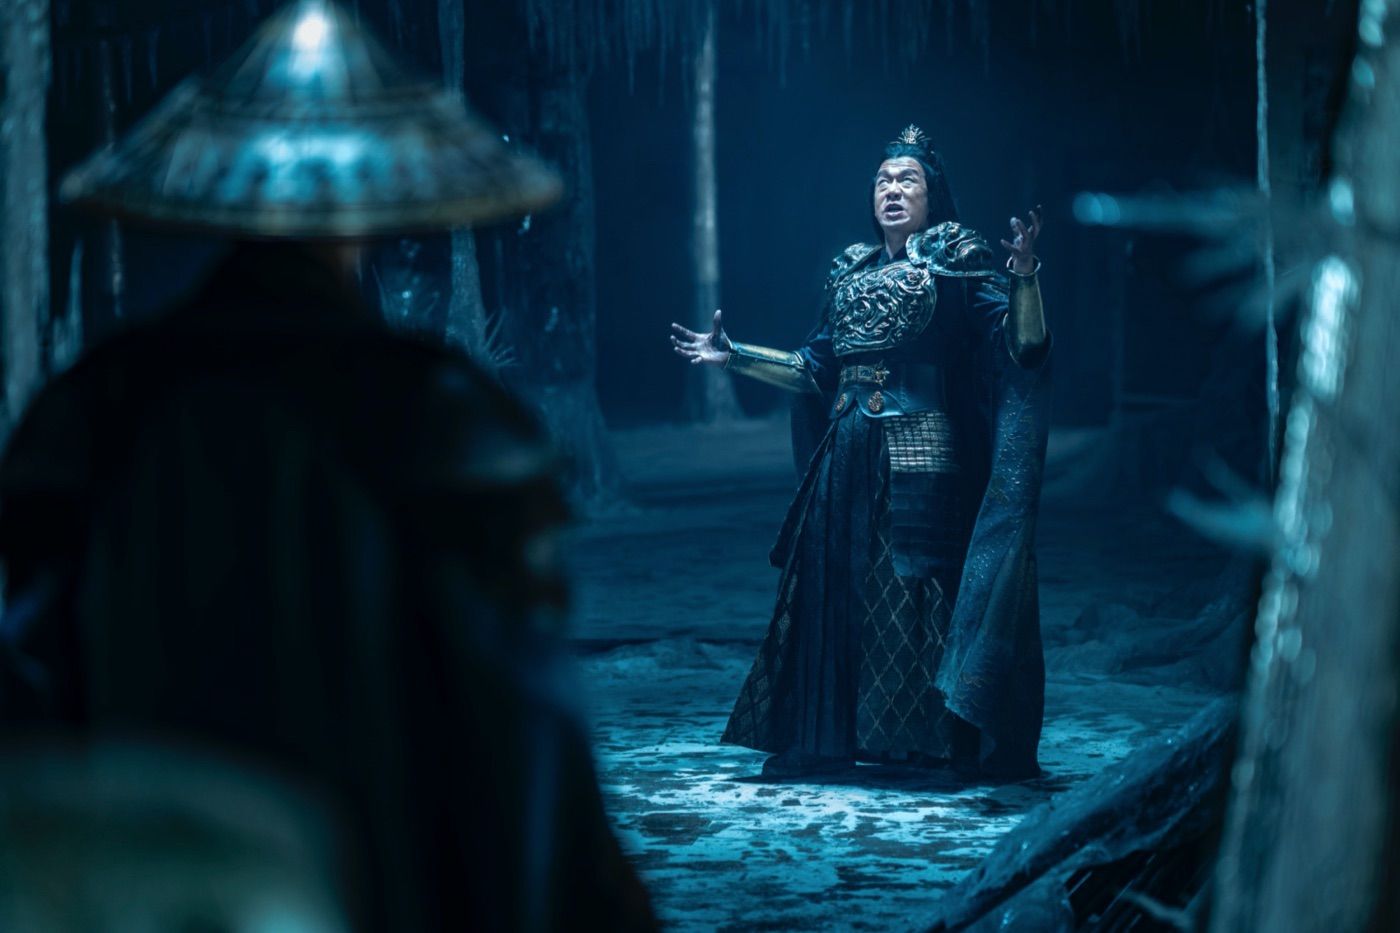 New Mortal Kombat Images Tease Heroes and Villains in High Definition ...